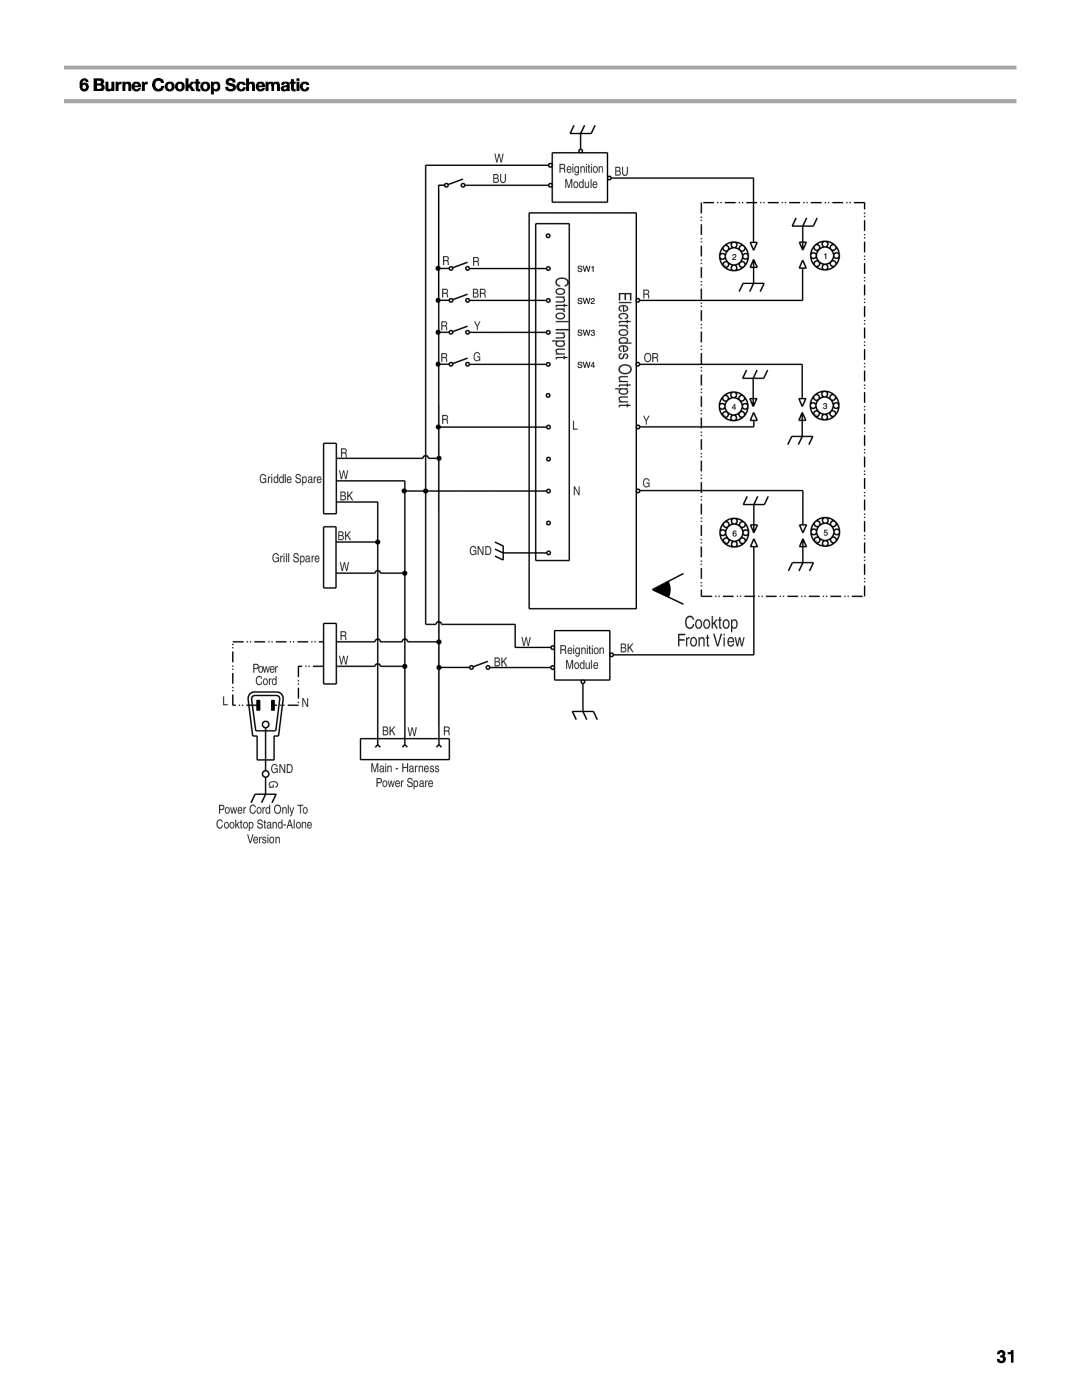 Jenn-Air W10394575A installation instructions Burner Cooktop Schematic, Cooktop Front View, Output 